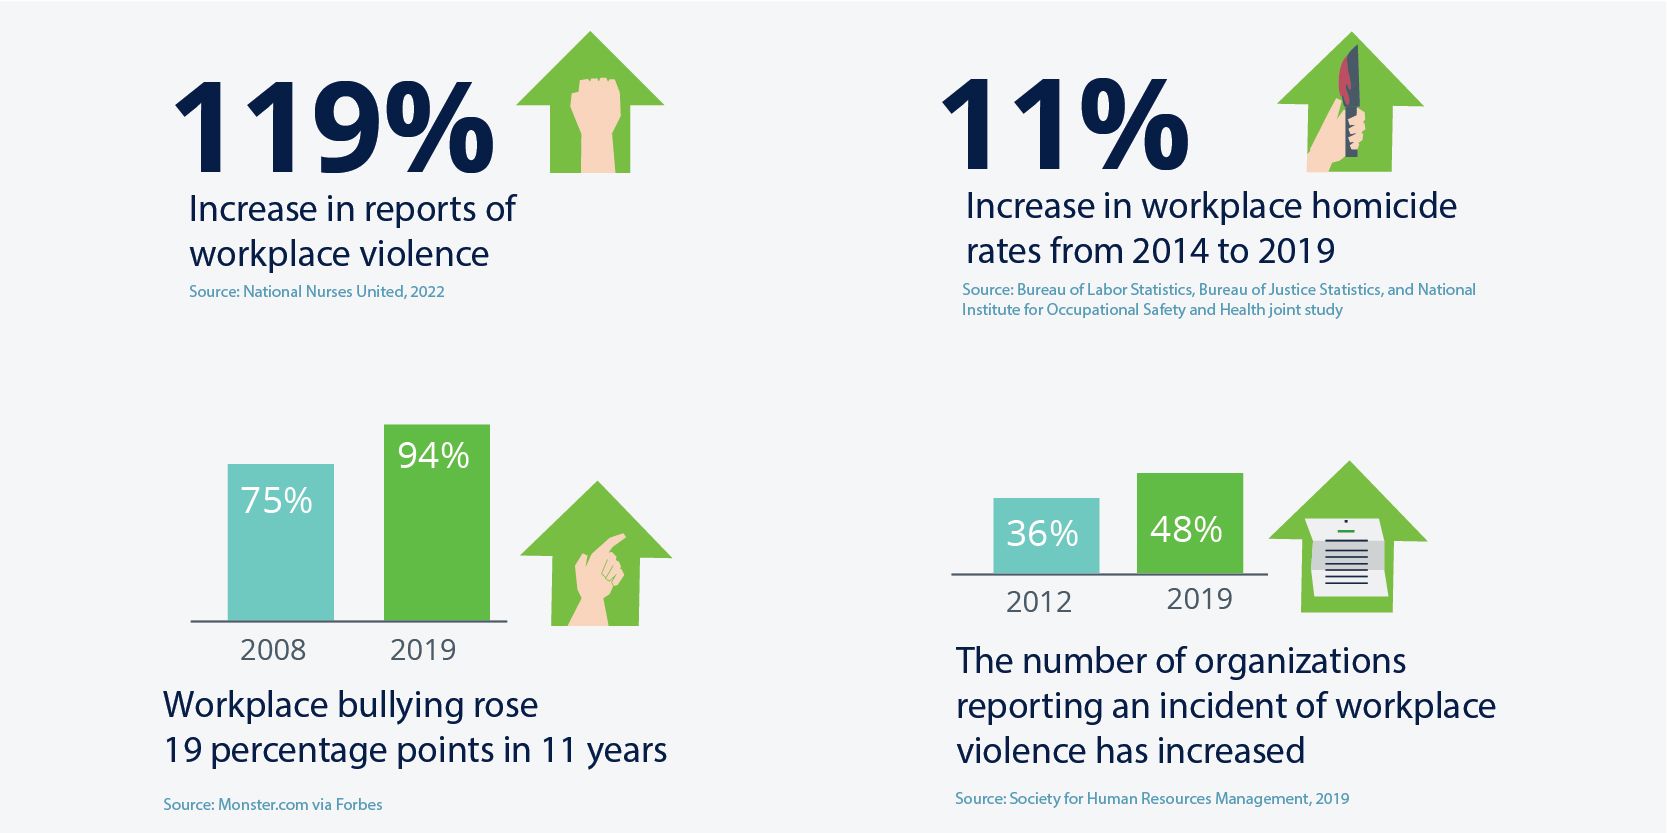 workplace violence increasing: 119% increase in reports of workplace violence, 11% increase in workplace homicide rates from 2014 to 2019